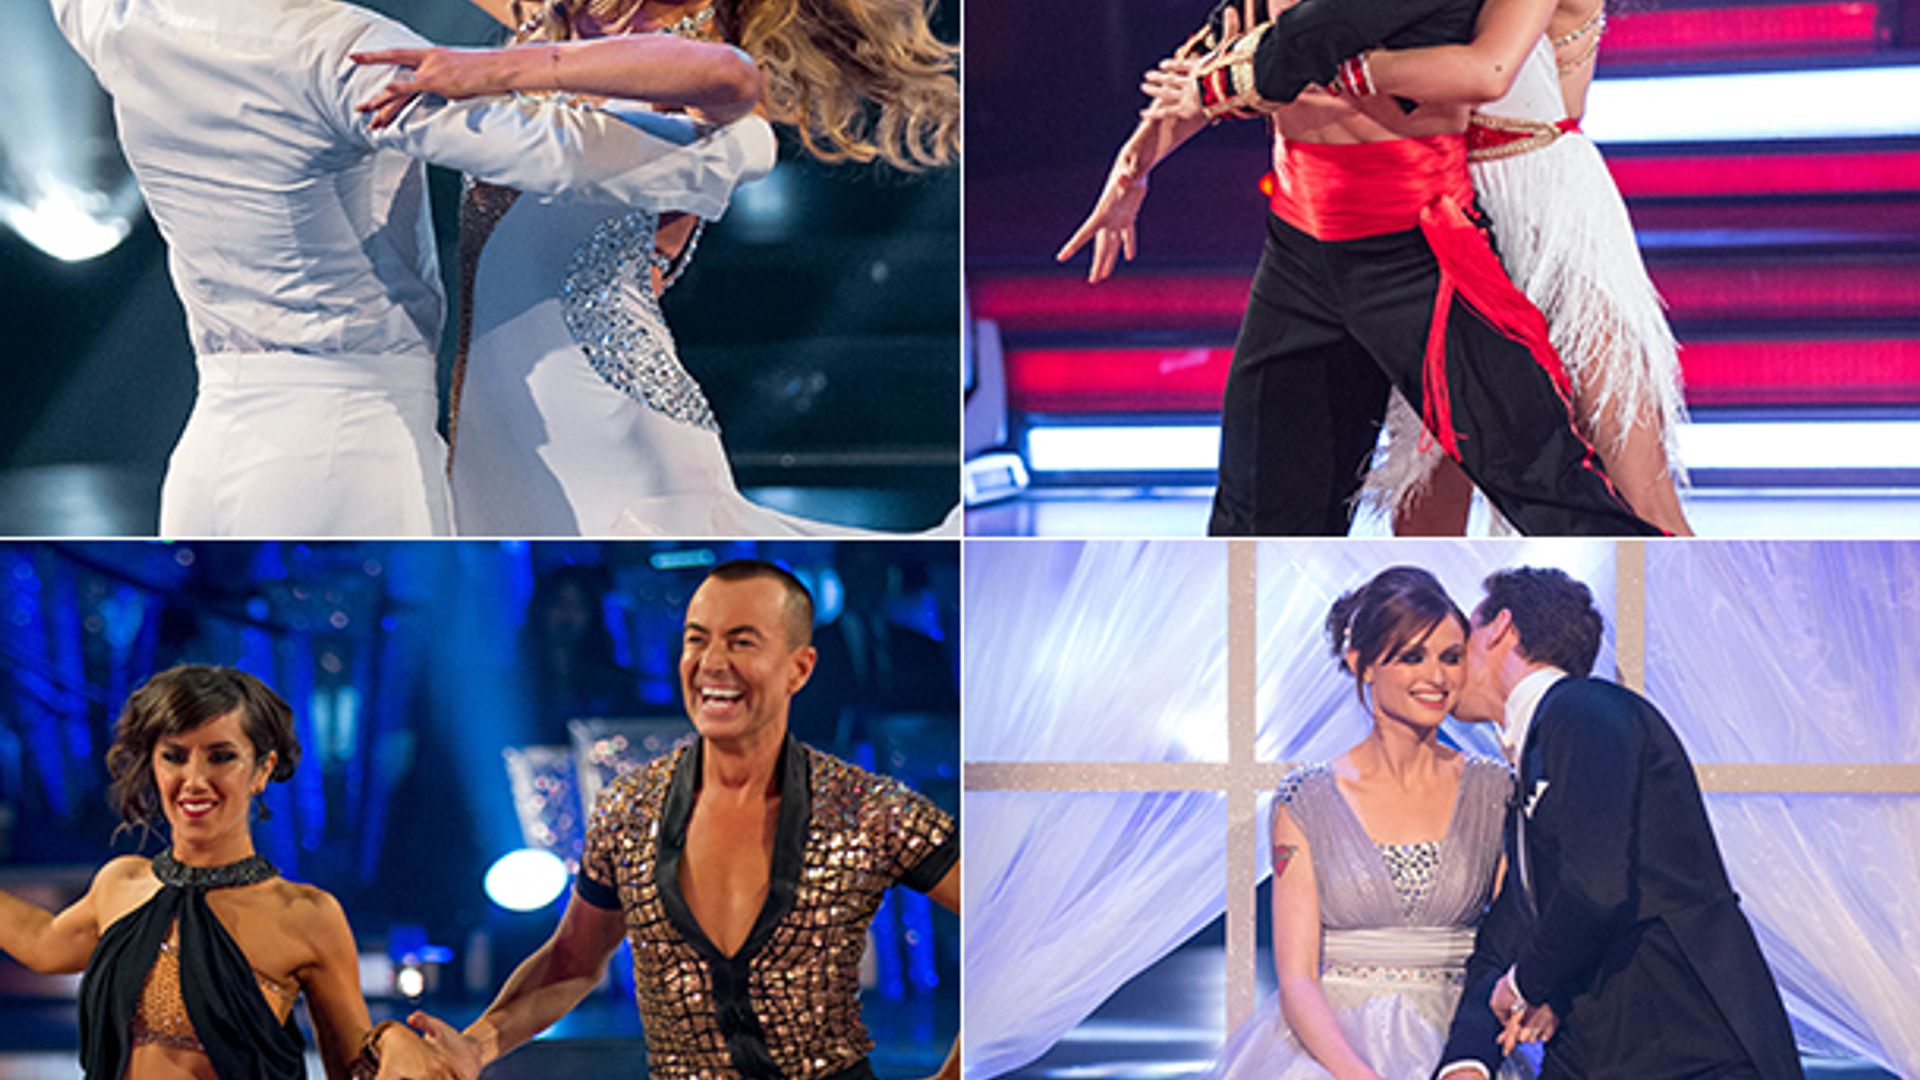 Vote for who you think danced best in Strictly Come Dancing